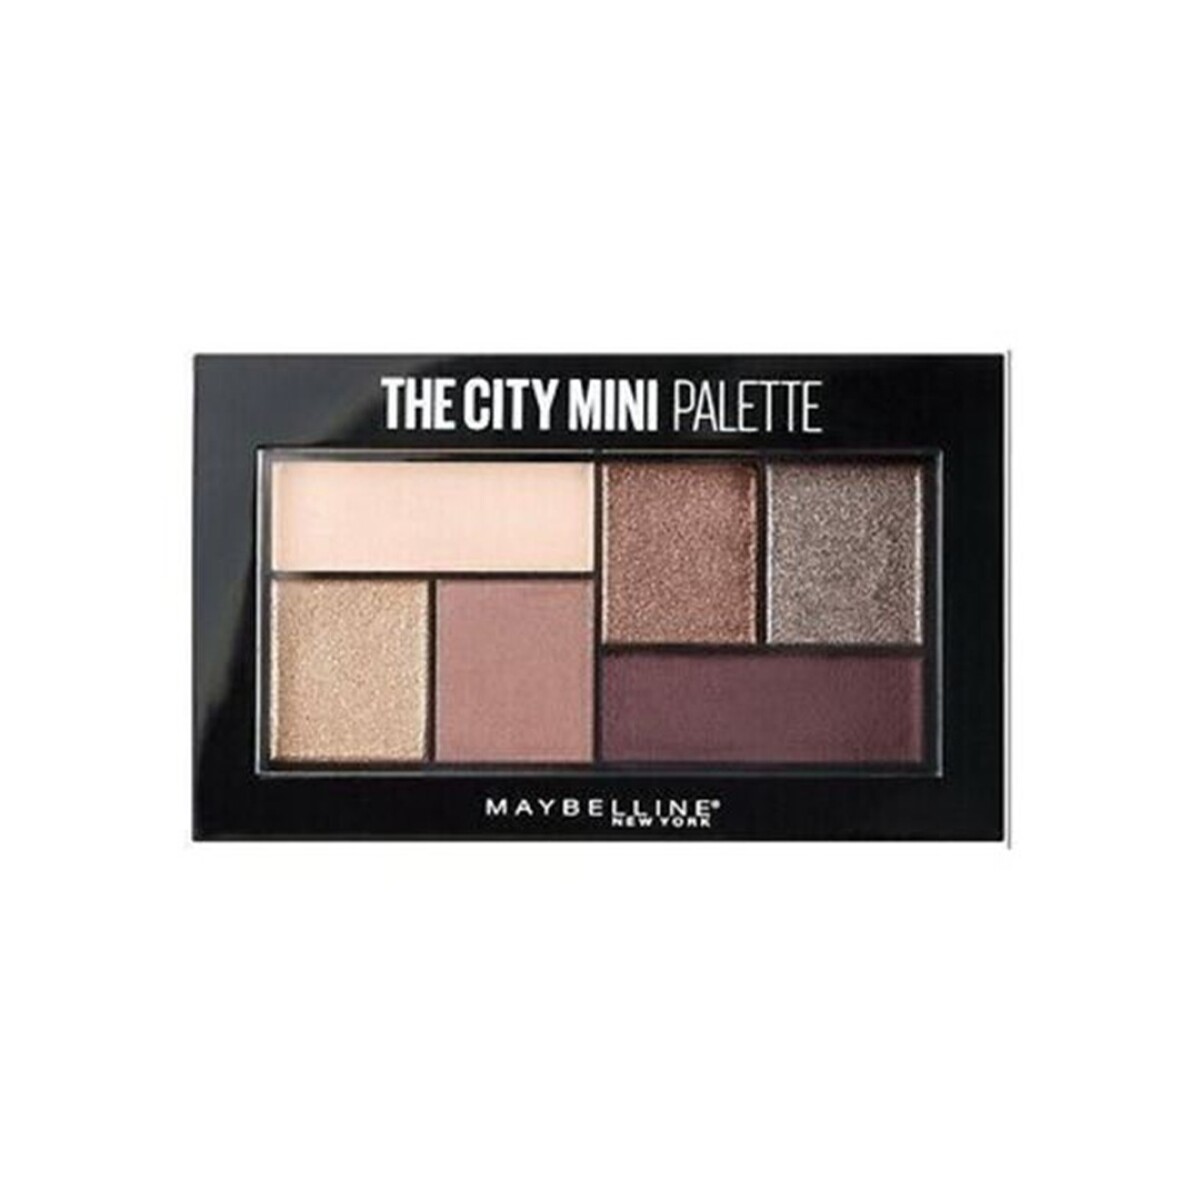 Sombras Maybelline The City Mini Palette - Chill Brunch - 001 